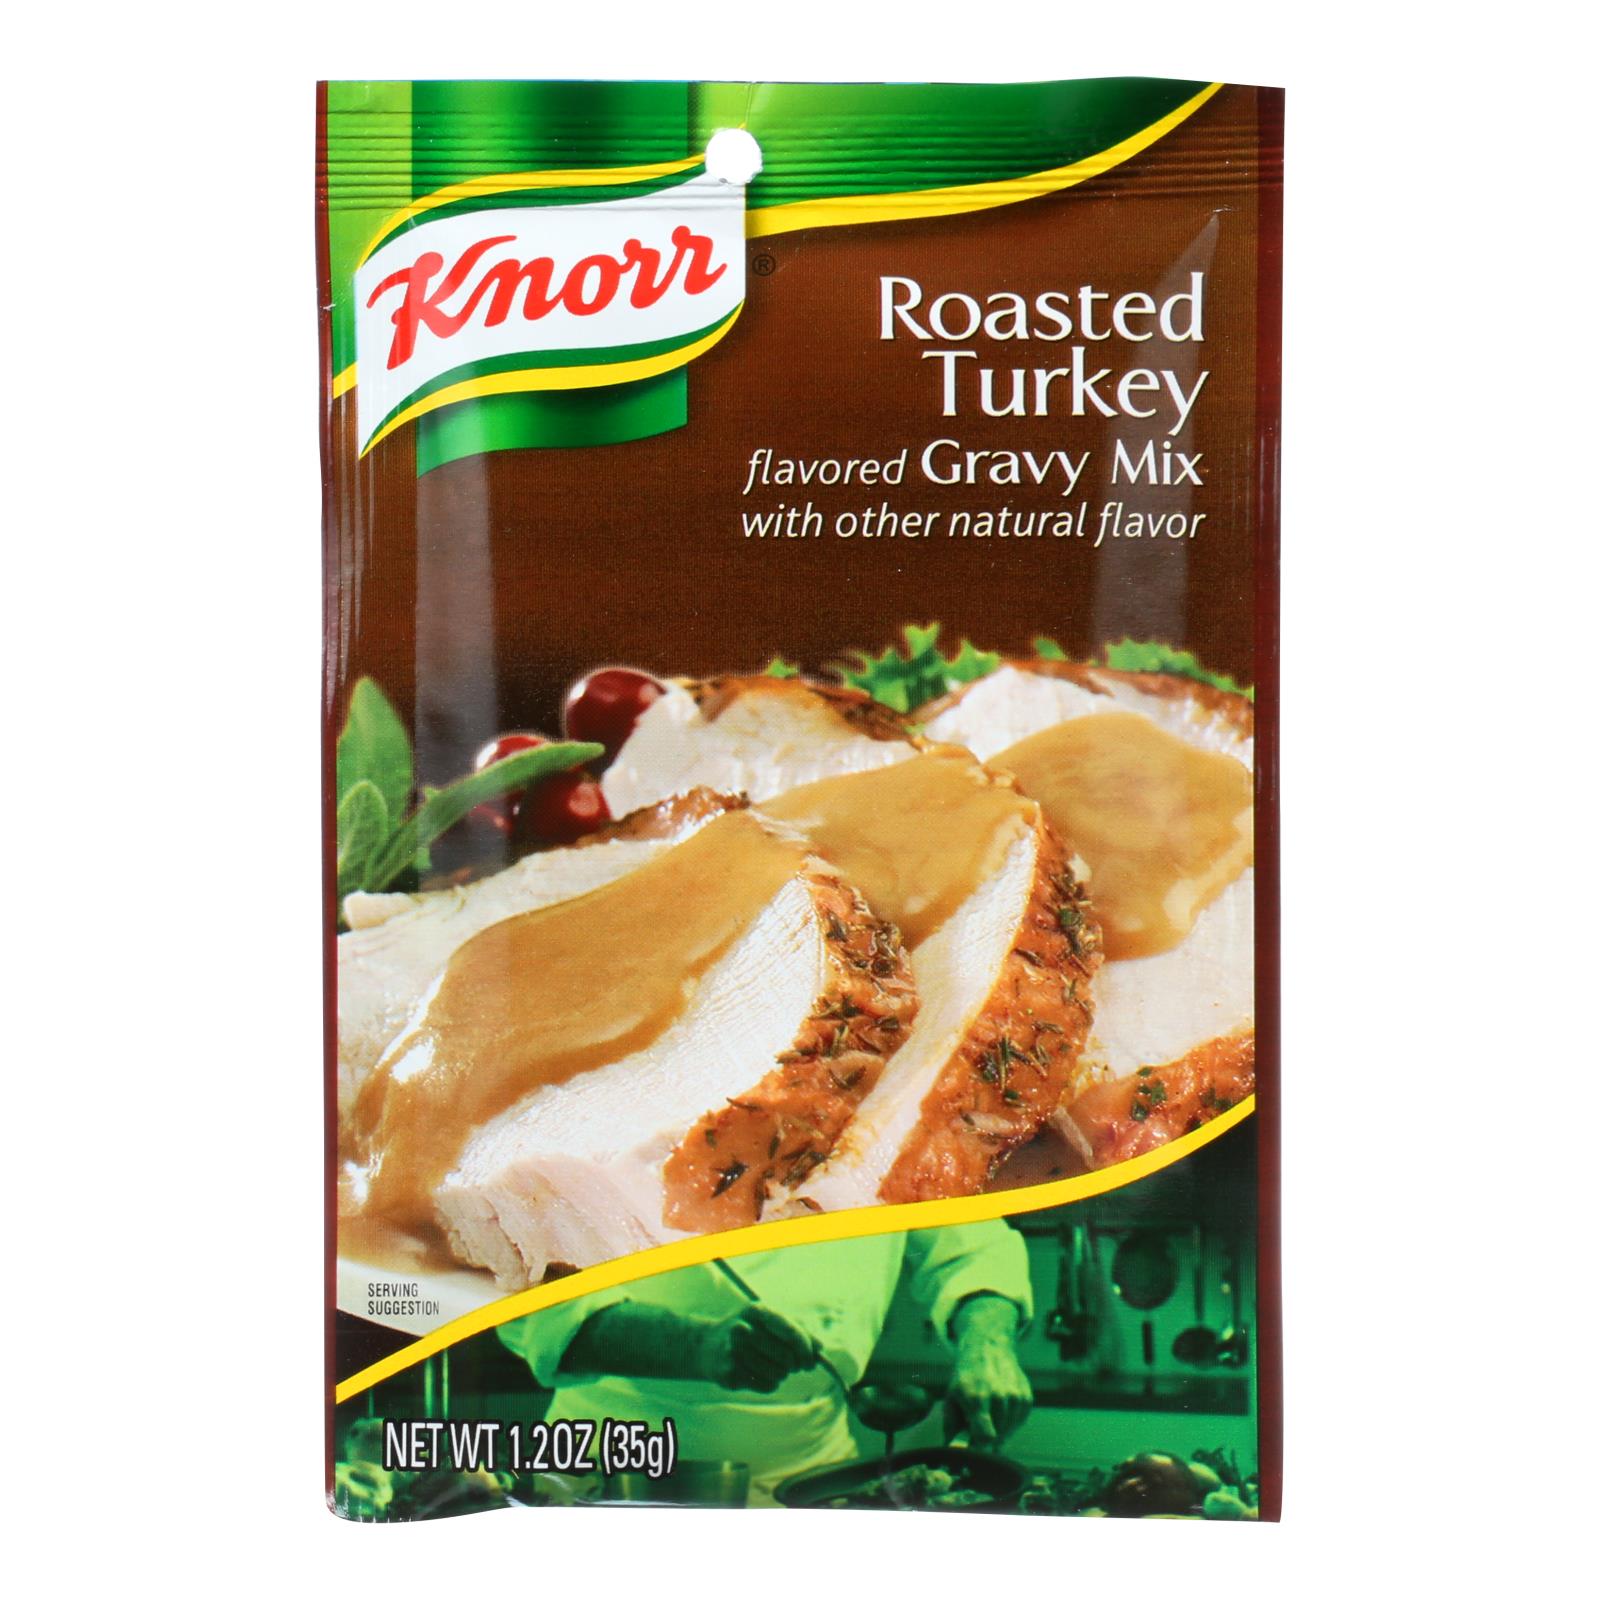 Knorr, Knorr Gravy Mix - Roasted Turkey Flavored - 1.2 oz - Case of 12 (Pack of 12)